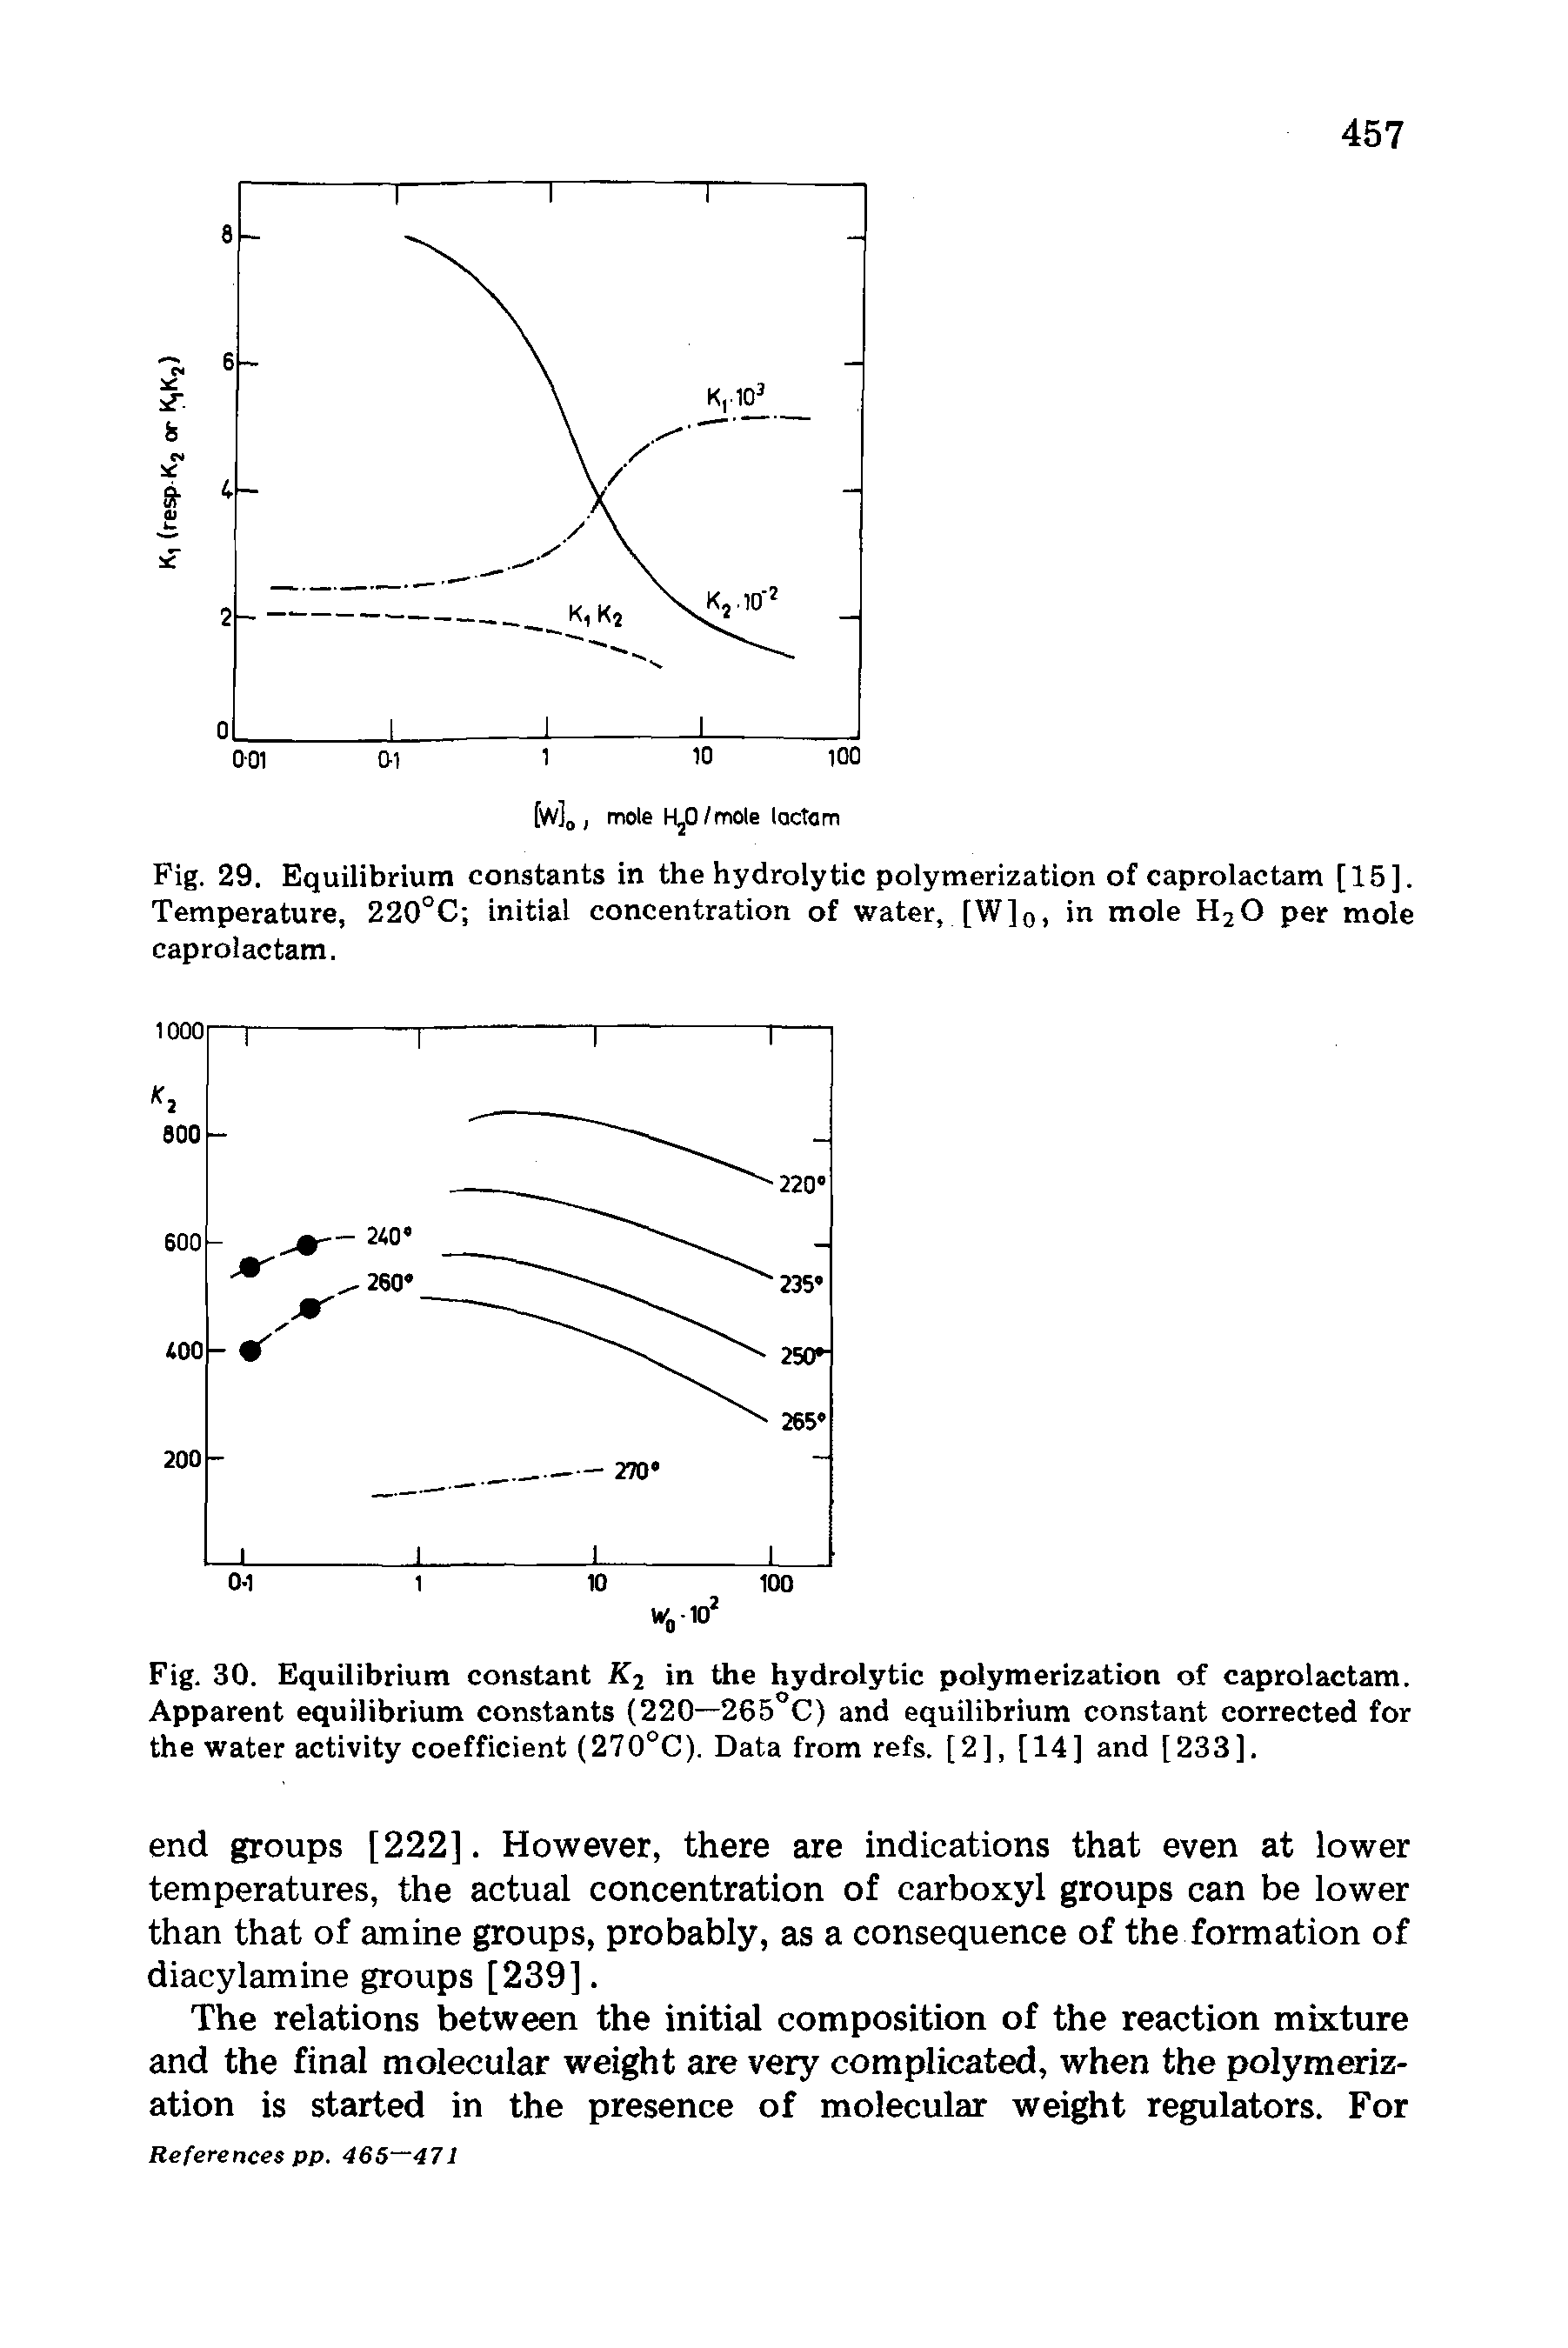 Fig. 30. Equilibrium constant in the hydrolytic polymerization of caprolactam. Apparent equilibrium constants (220—265 C) and equilibrium constant corrected for the water activity coefficient (270°C). Data from refs. [2], [14] and [233].